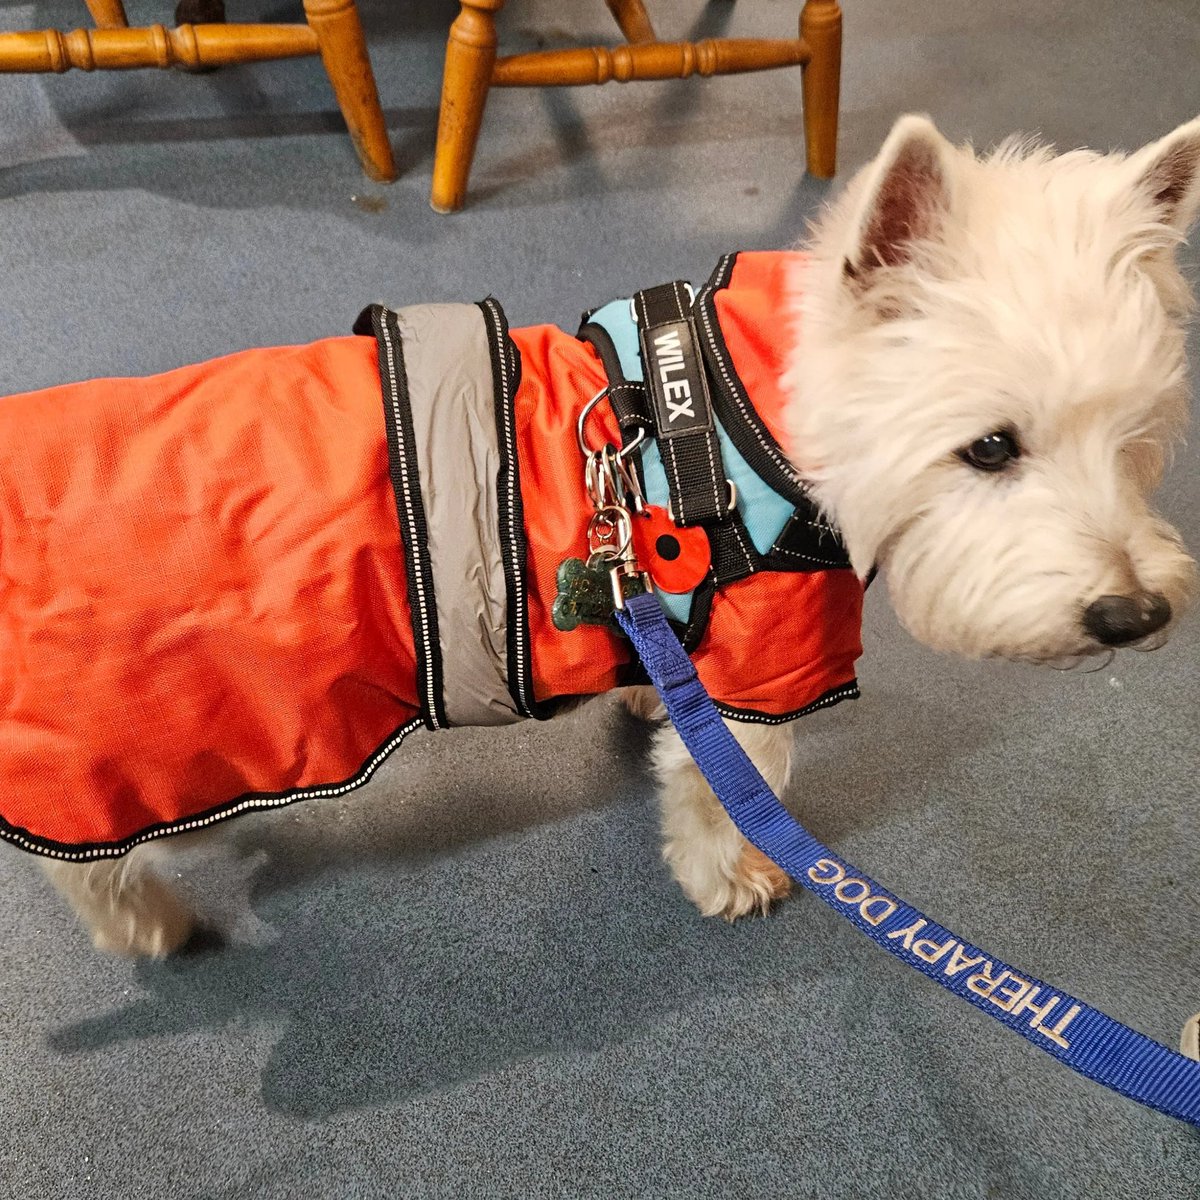 It was anuver cold #WestieWednesday today in Paignton. Gots lots of tickles and cuddles from lots of hoomans me didn't know. Xx